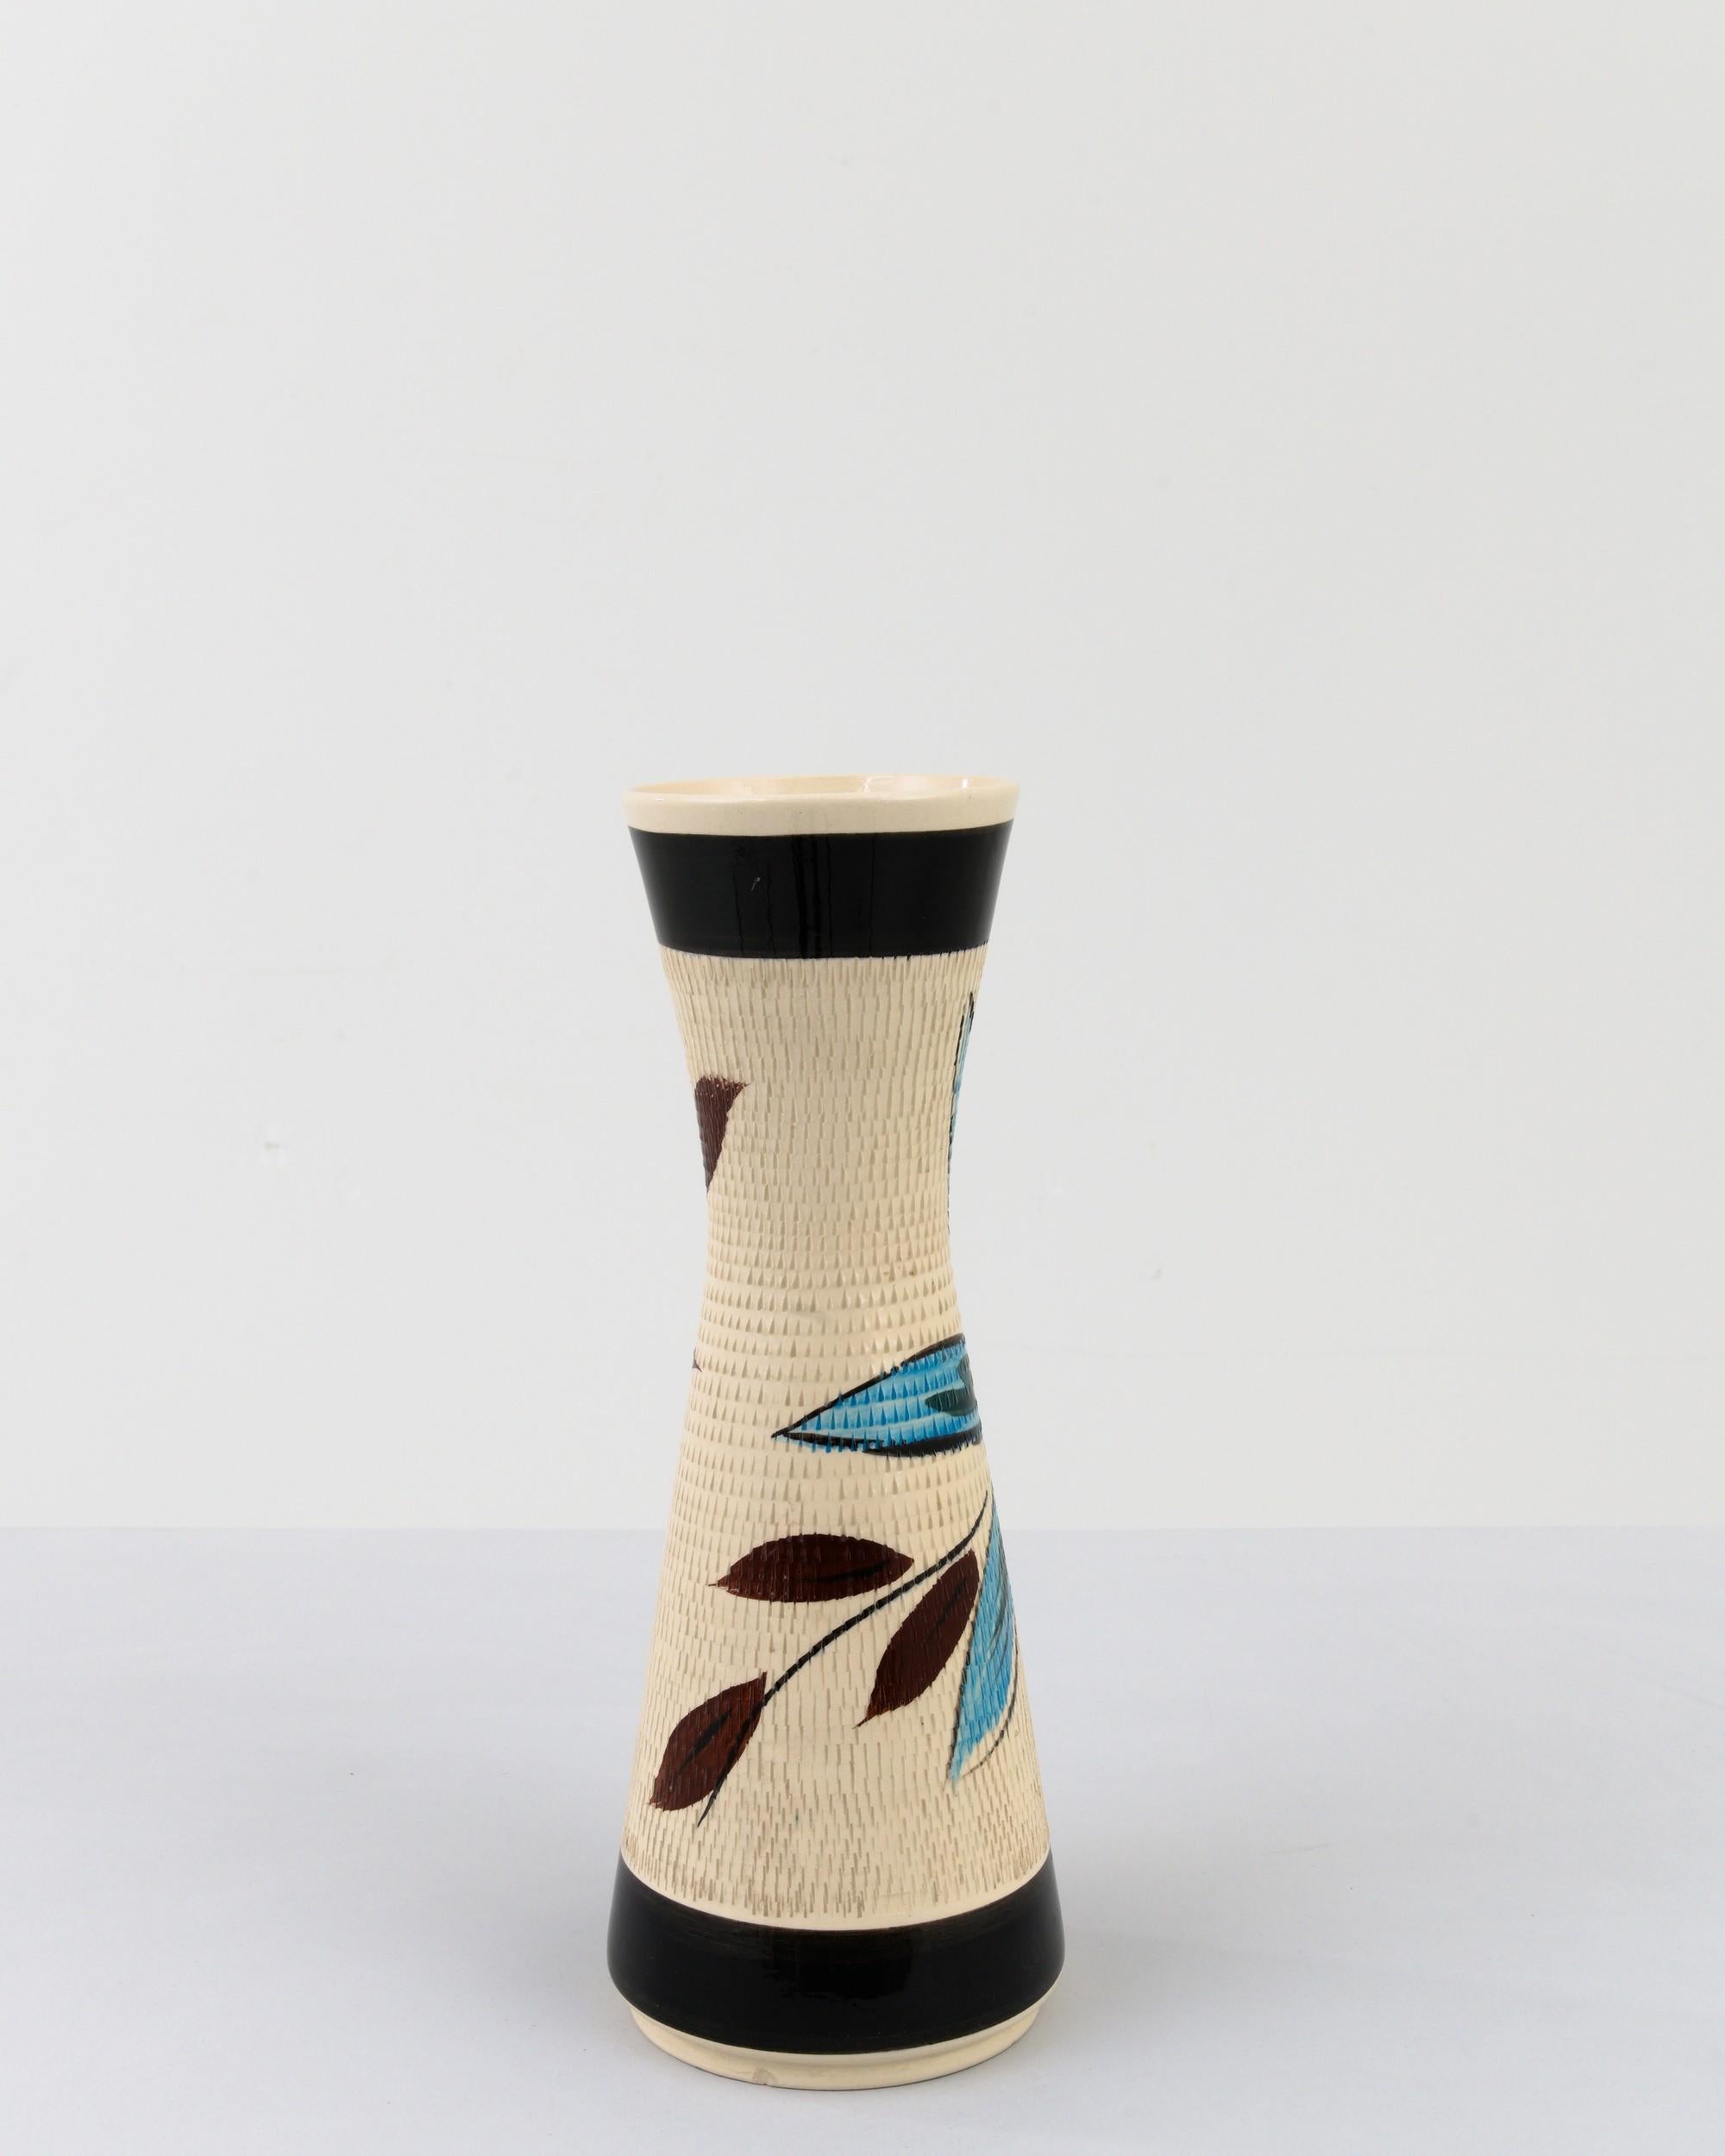 A ceramic vase from mid-20th century Germany. Neither large nor small, this studio made pot reflects the hand-held, and the handmade; the tactility of process and the artist's vision– realized on the potter’s wheel. The dimpled surface gives the